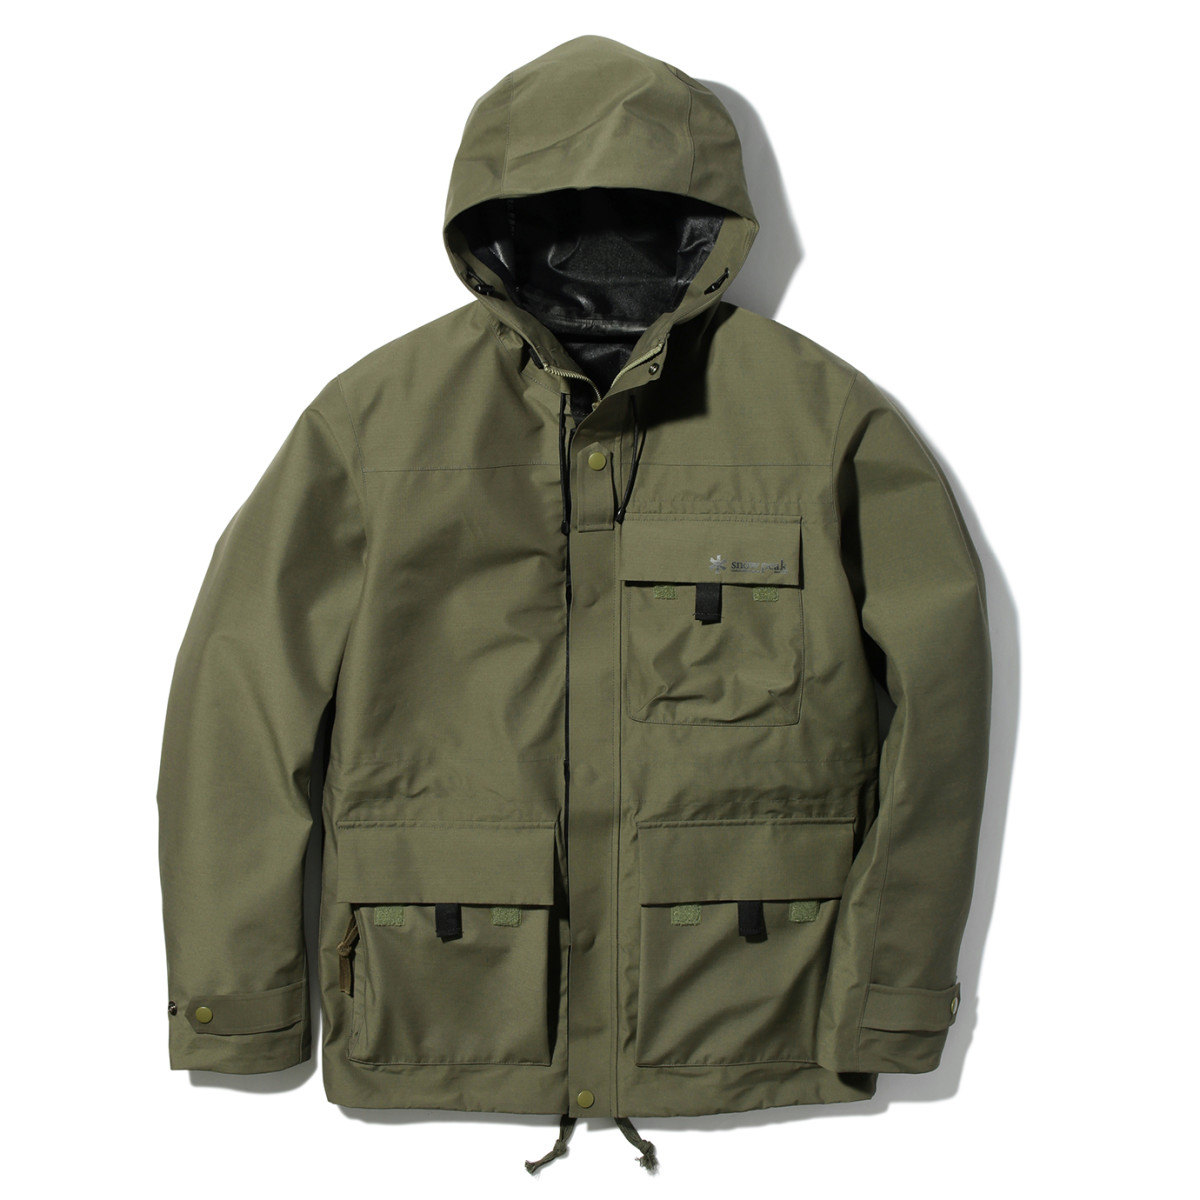 Mens Raincoats We're Digging Right Now